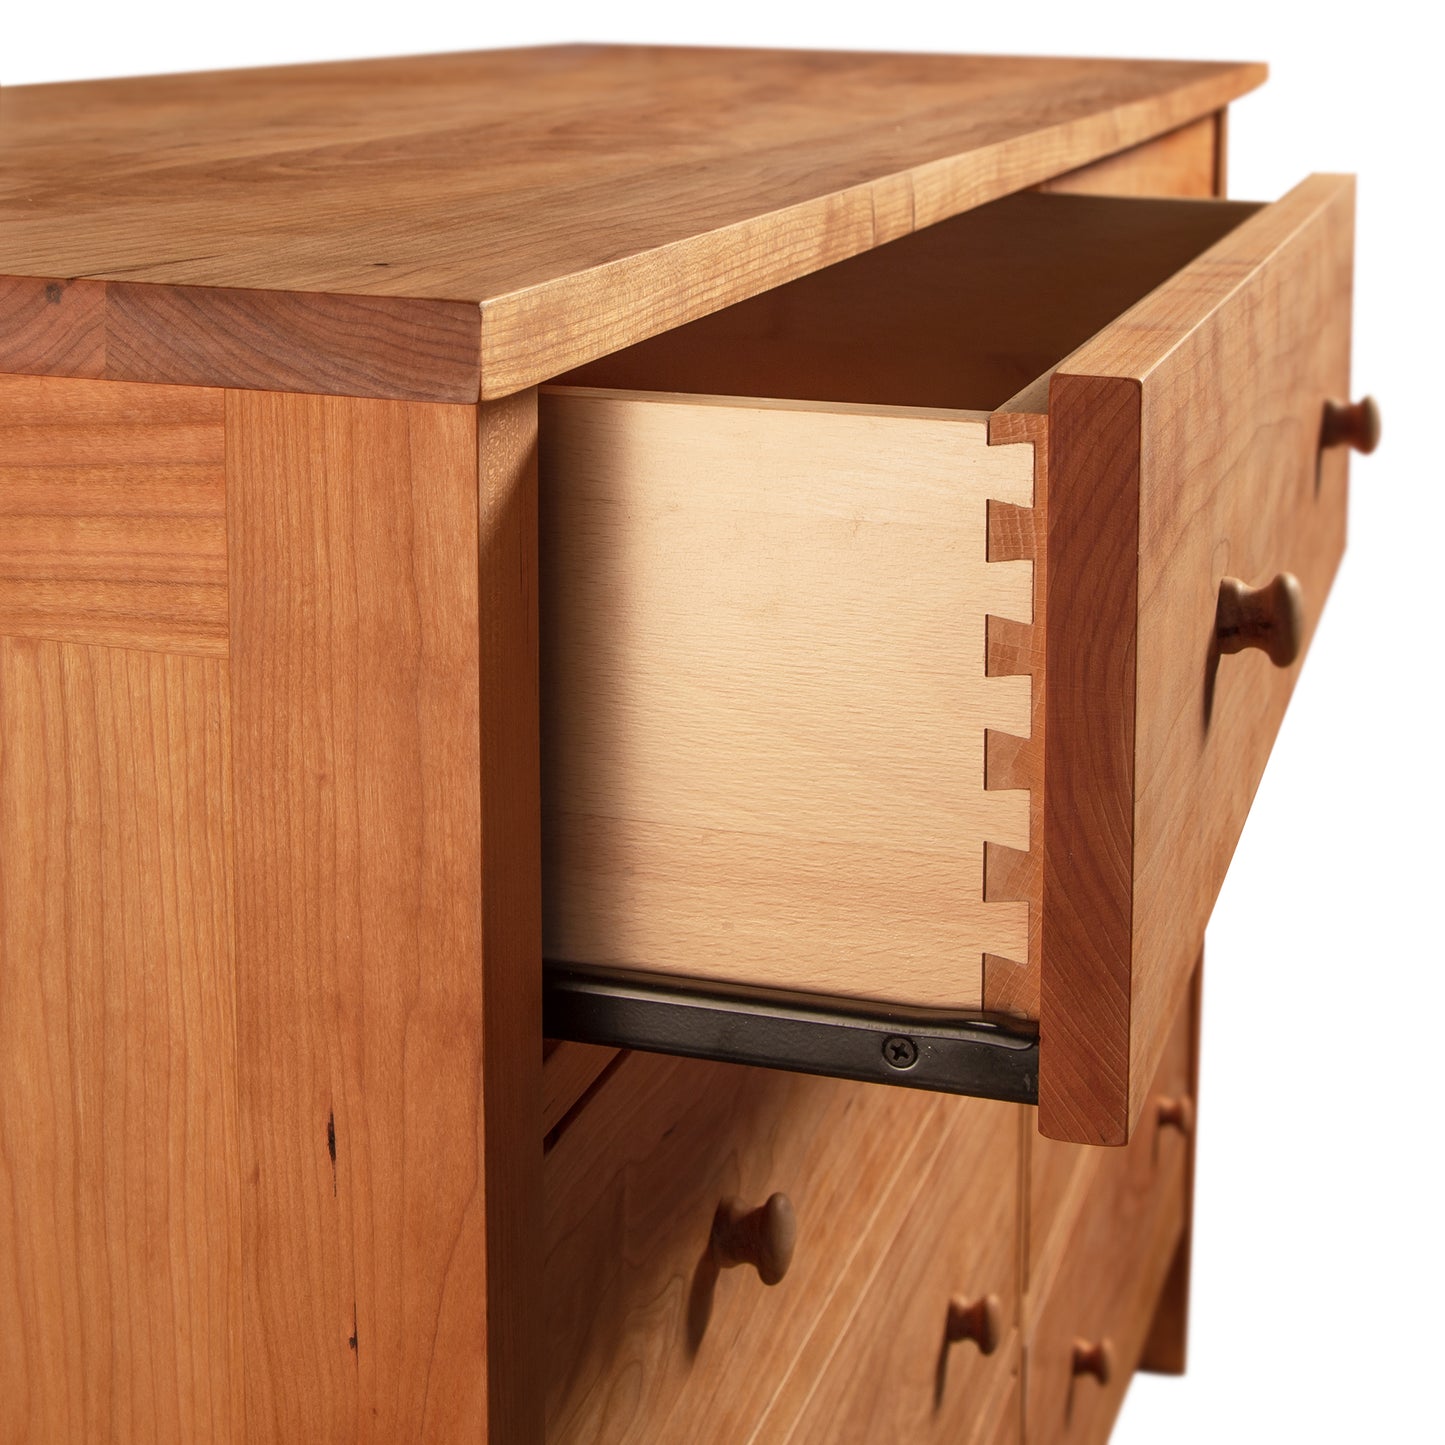 Luxury bedroom furniture: Burlington Shaker 8-Drawer Dresser #1 with one drawer partially open, revealing dovetail joint construction as part of the Vermont Furniture Designs collection.